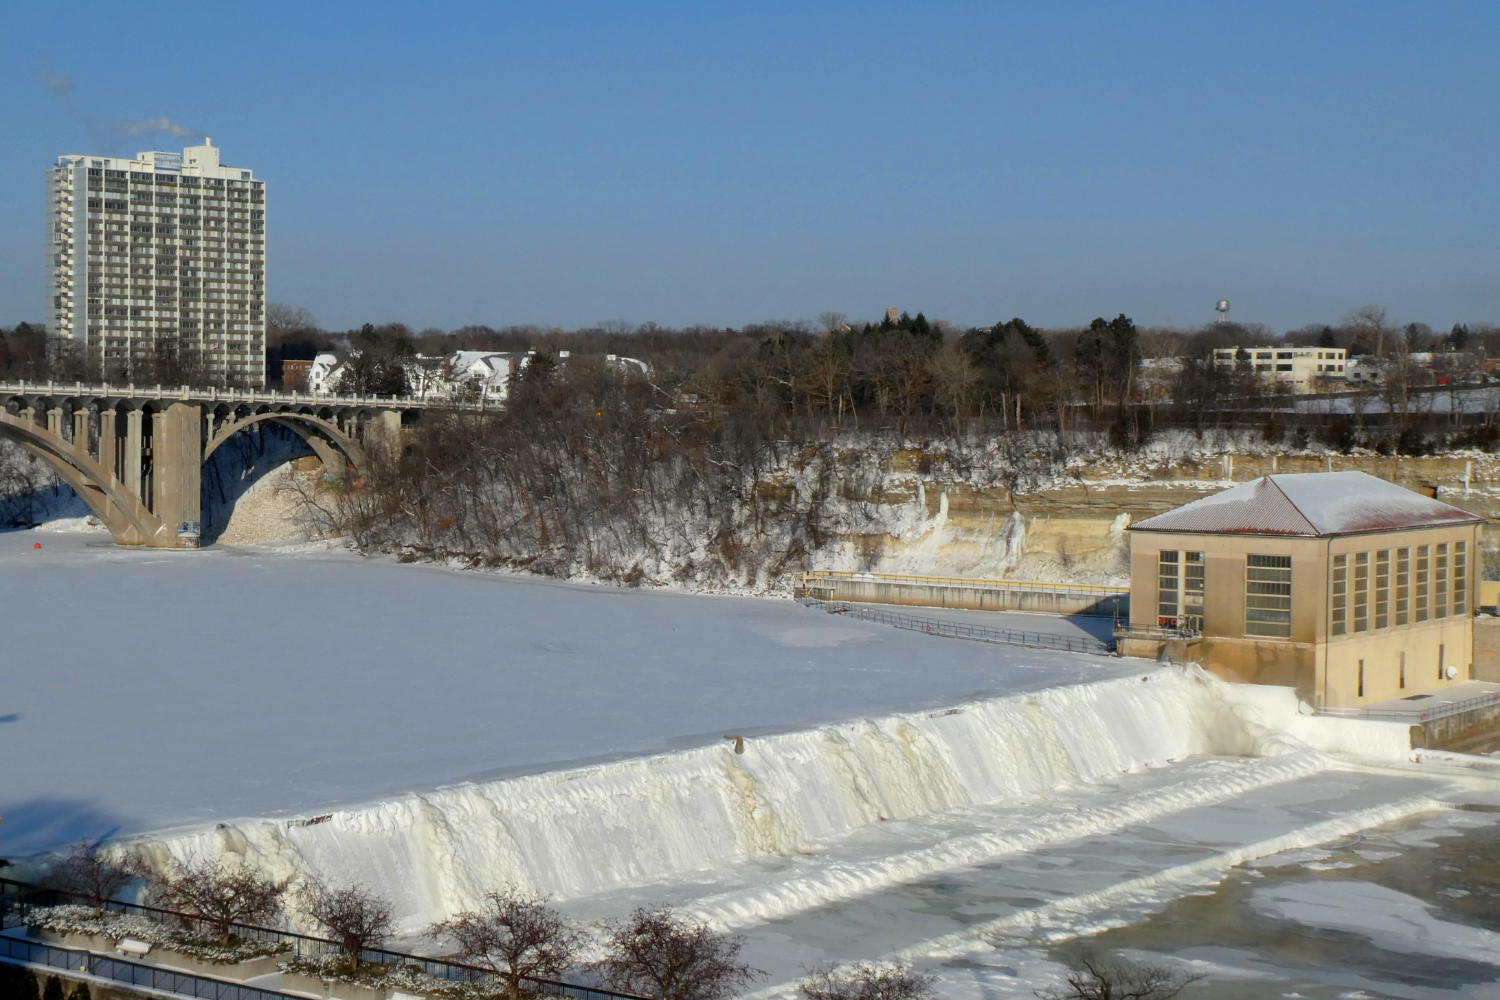 icy cascade over a dam on frozen mississippi river with old Ford power plant